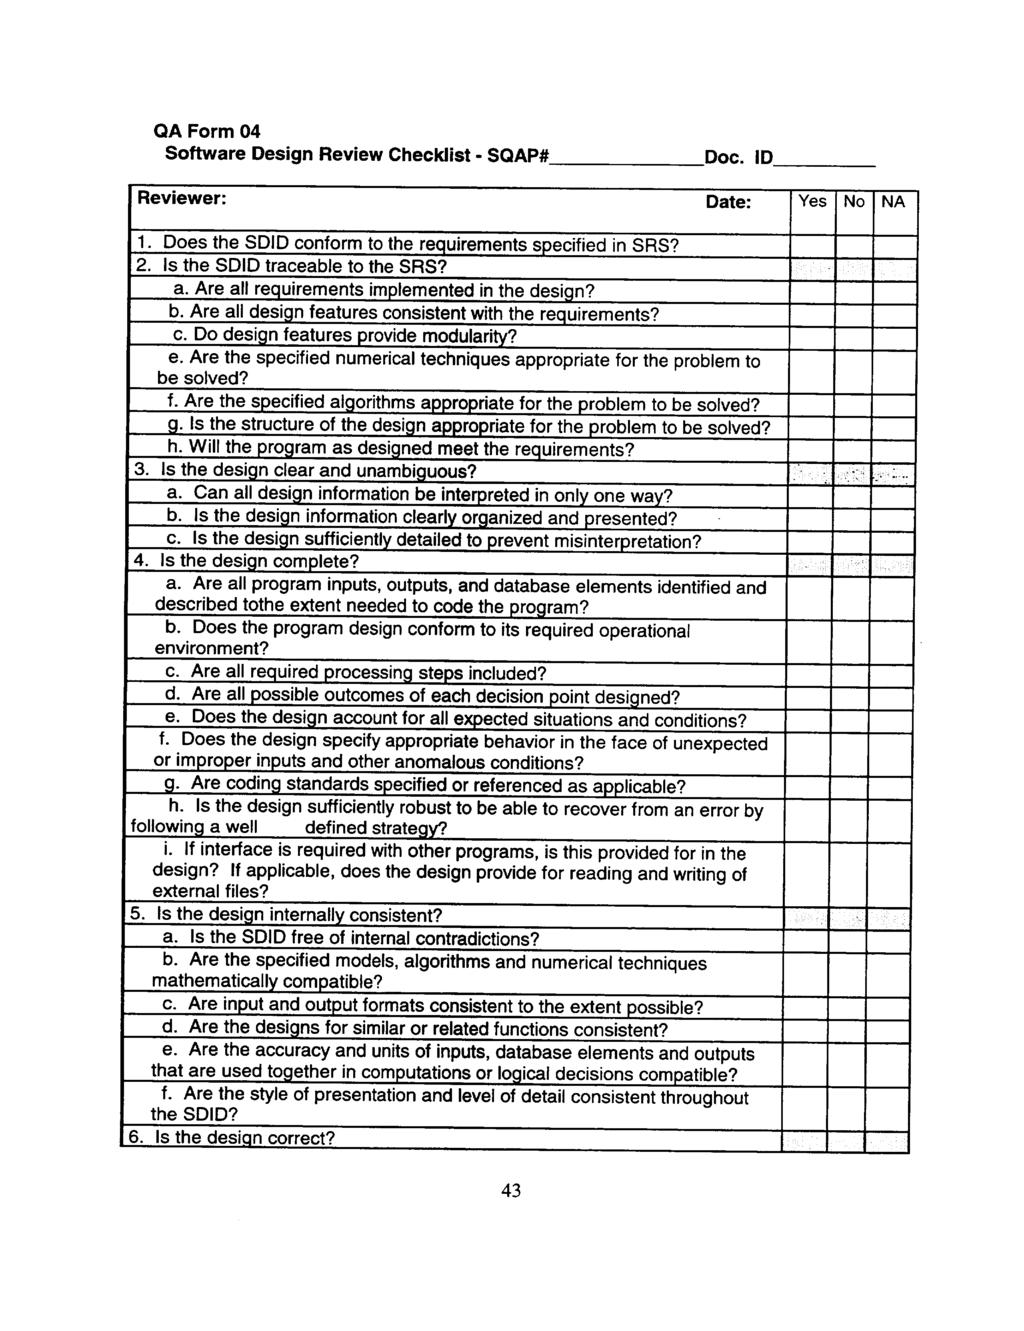 QA Form 04 Software Design Review Checklist - SQAPP Doc. ID Reviewer: Date: Yes No NA 1. Does the SDID conform to the requirements specified in SRS? 2. Is the SDID traceable to the SRS? a.